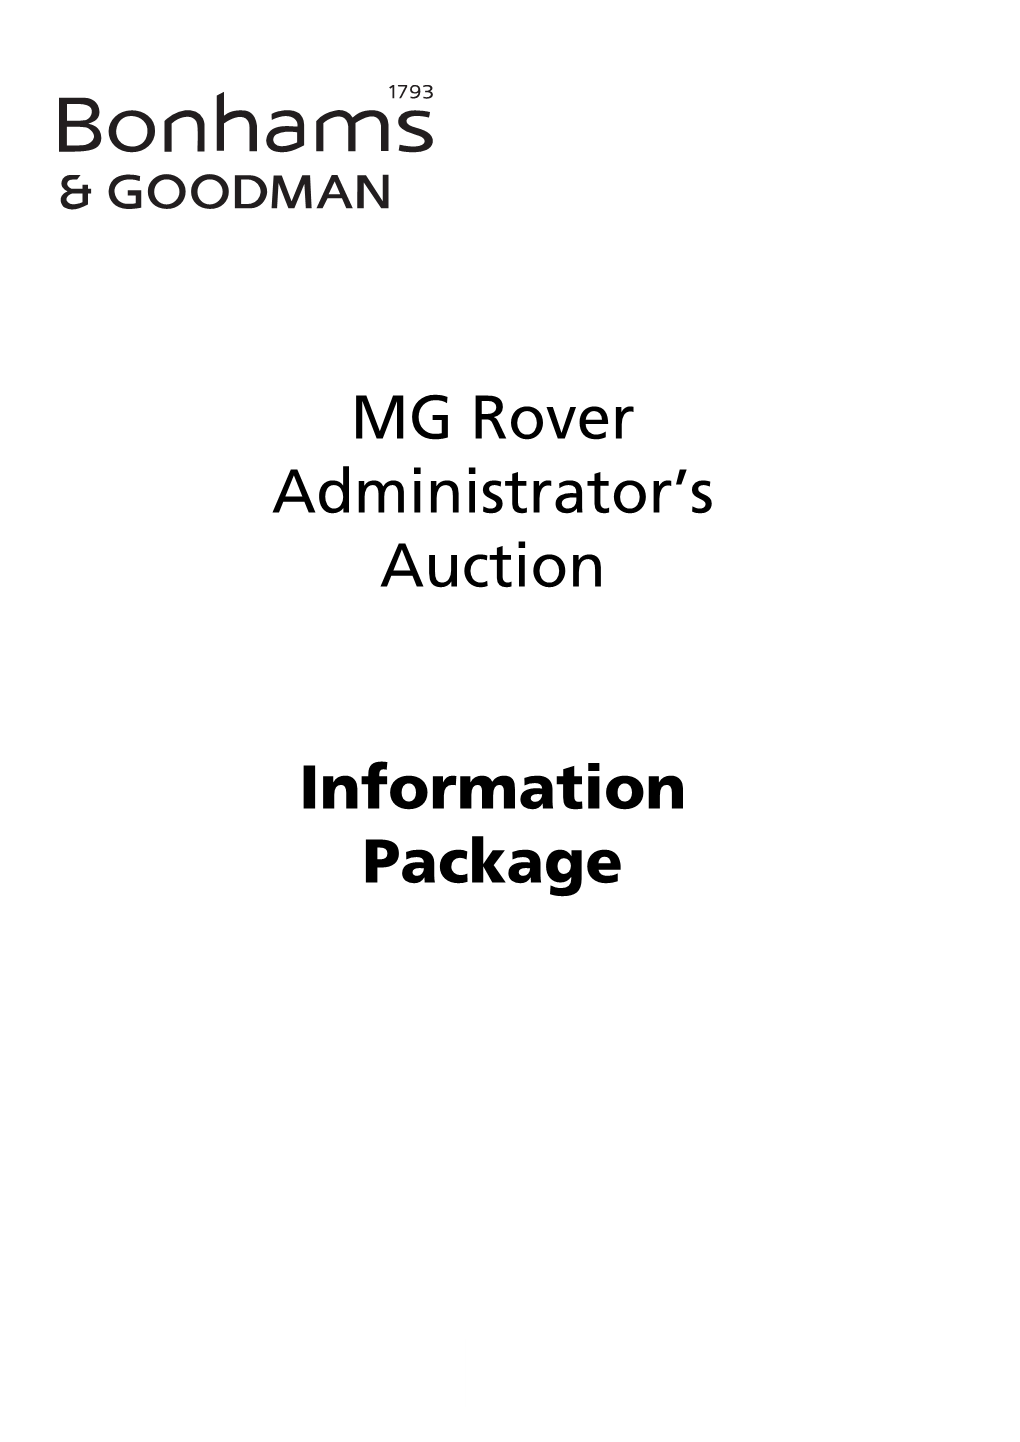 MG Rover Administrator's Auction Information Package